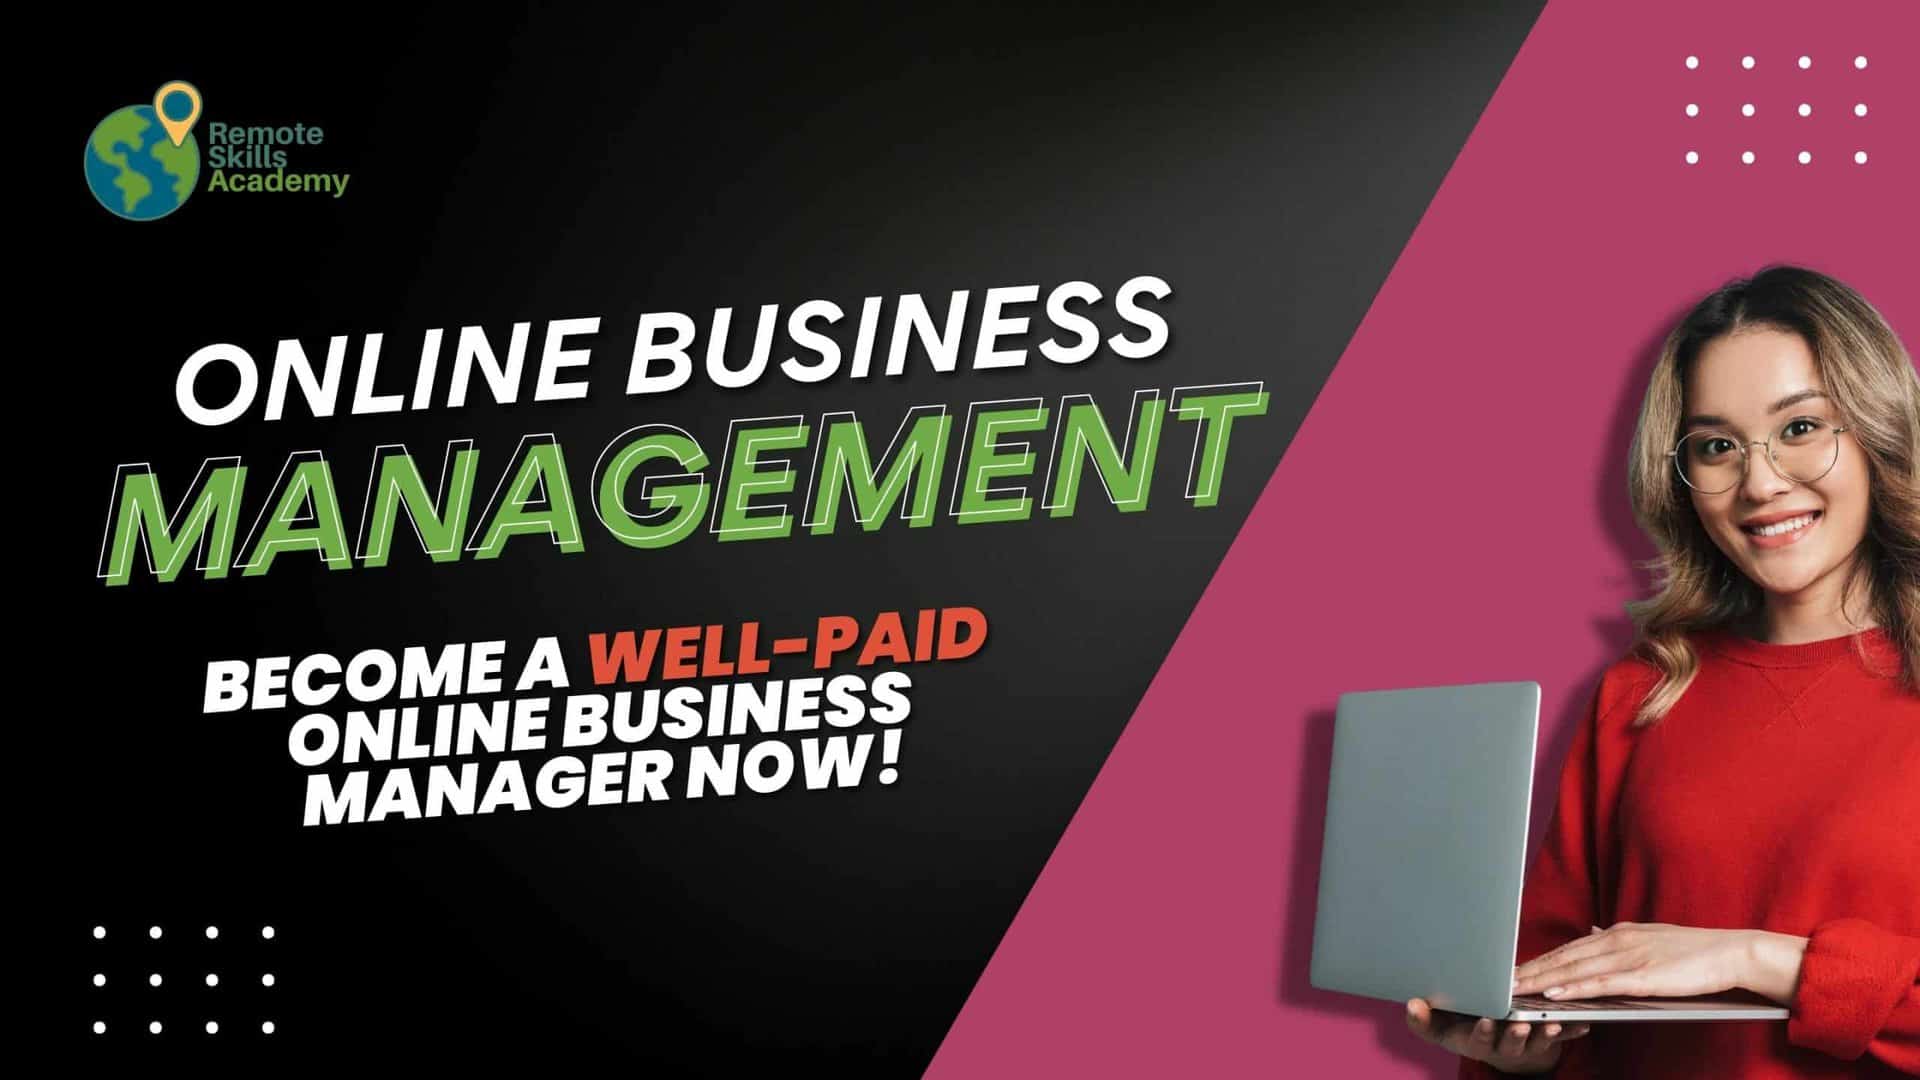 Online Business Management Course by Remote Skills Academy